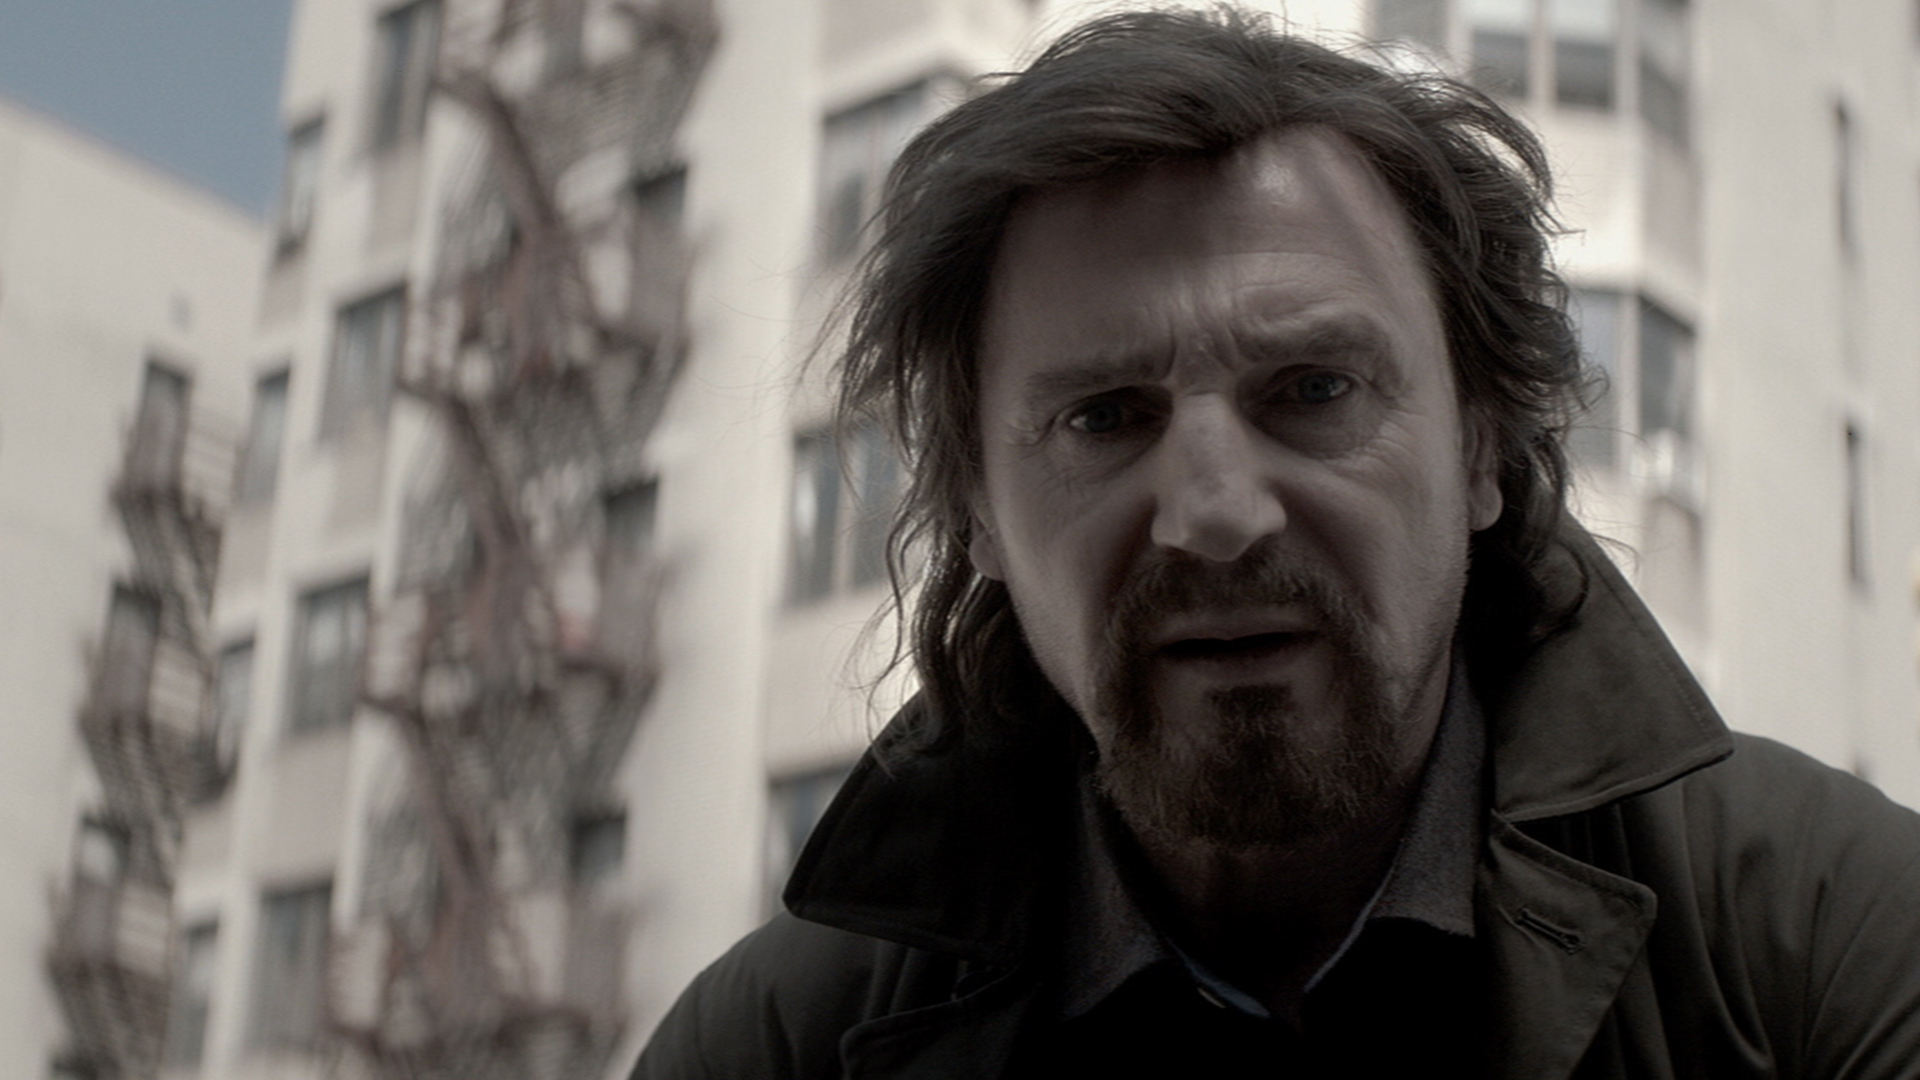 Movie A Walk Among The Tombstones HD Wallpaper | Background Image